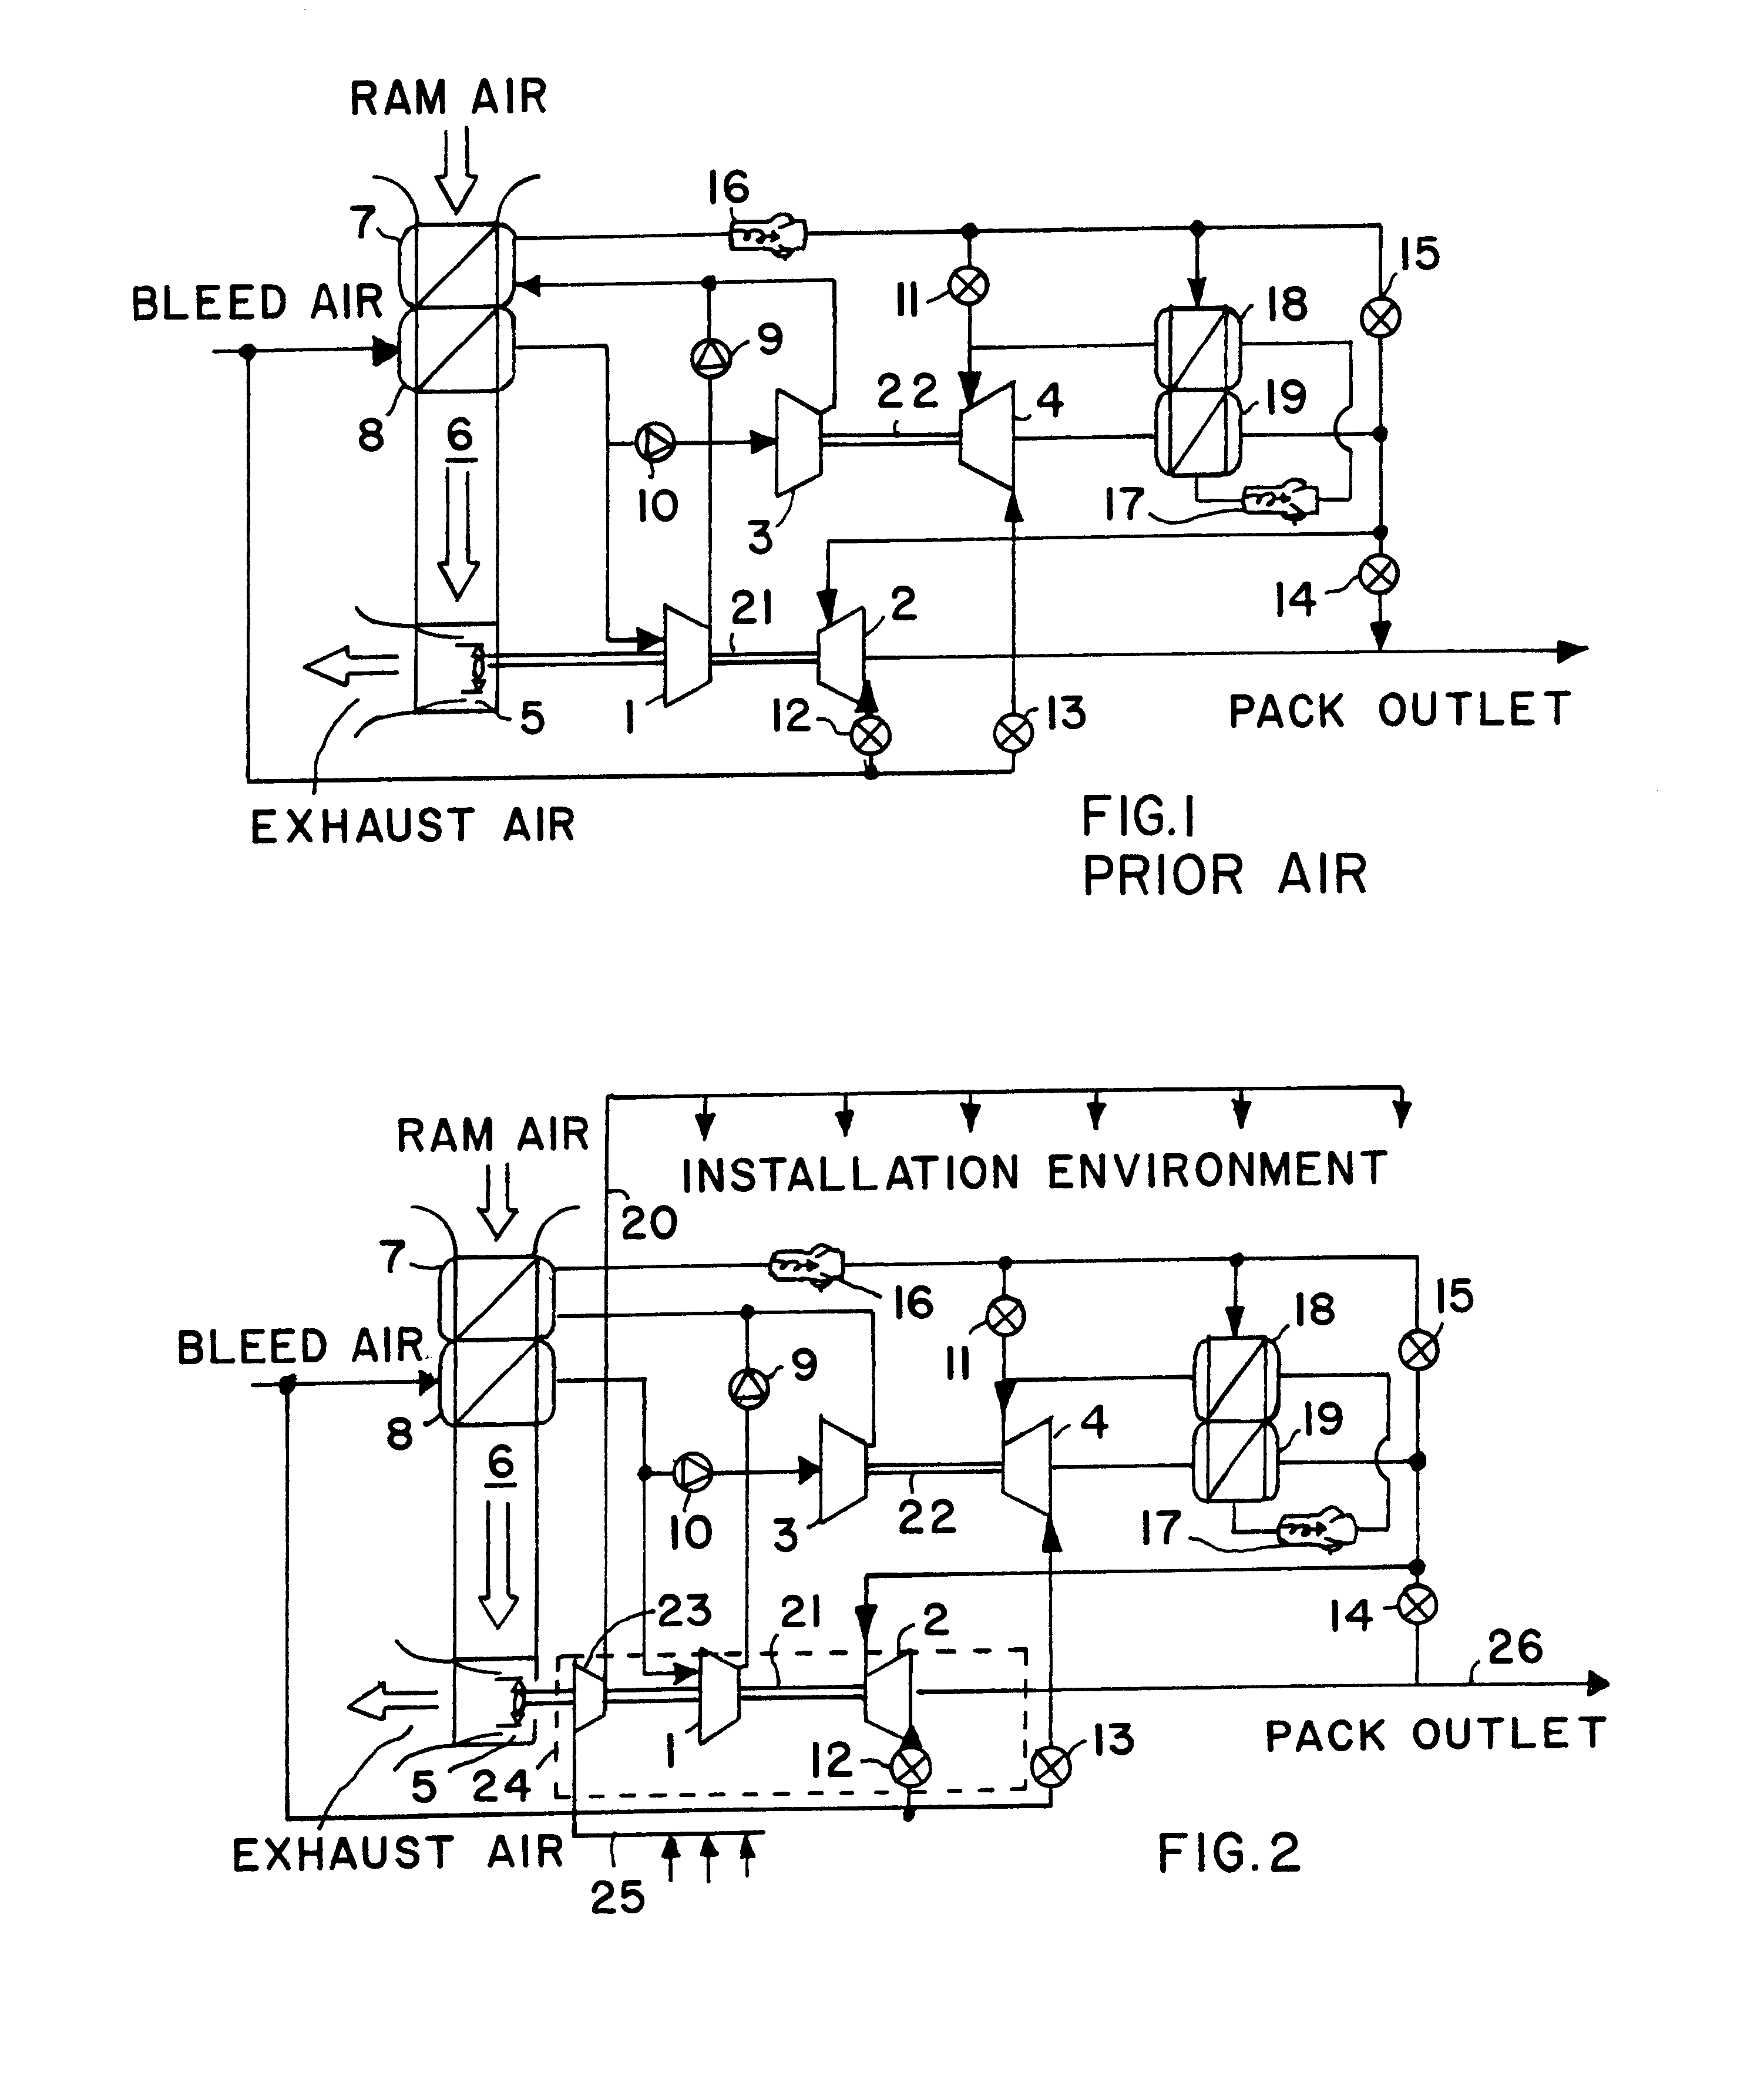 Aircraft air conditioning system providing auxiliary ventilation